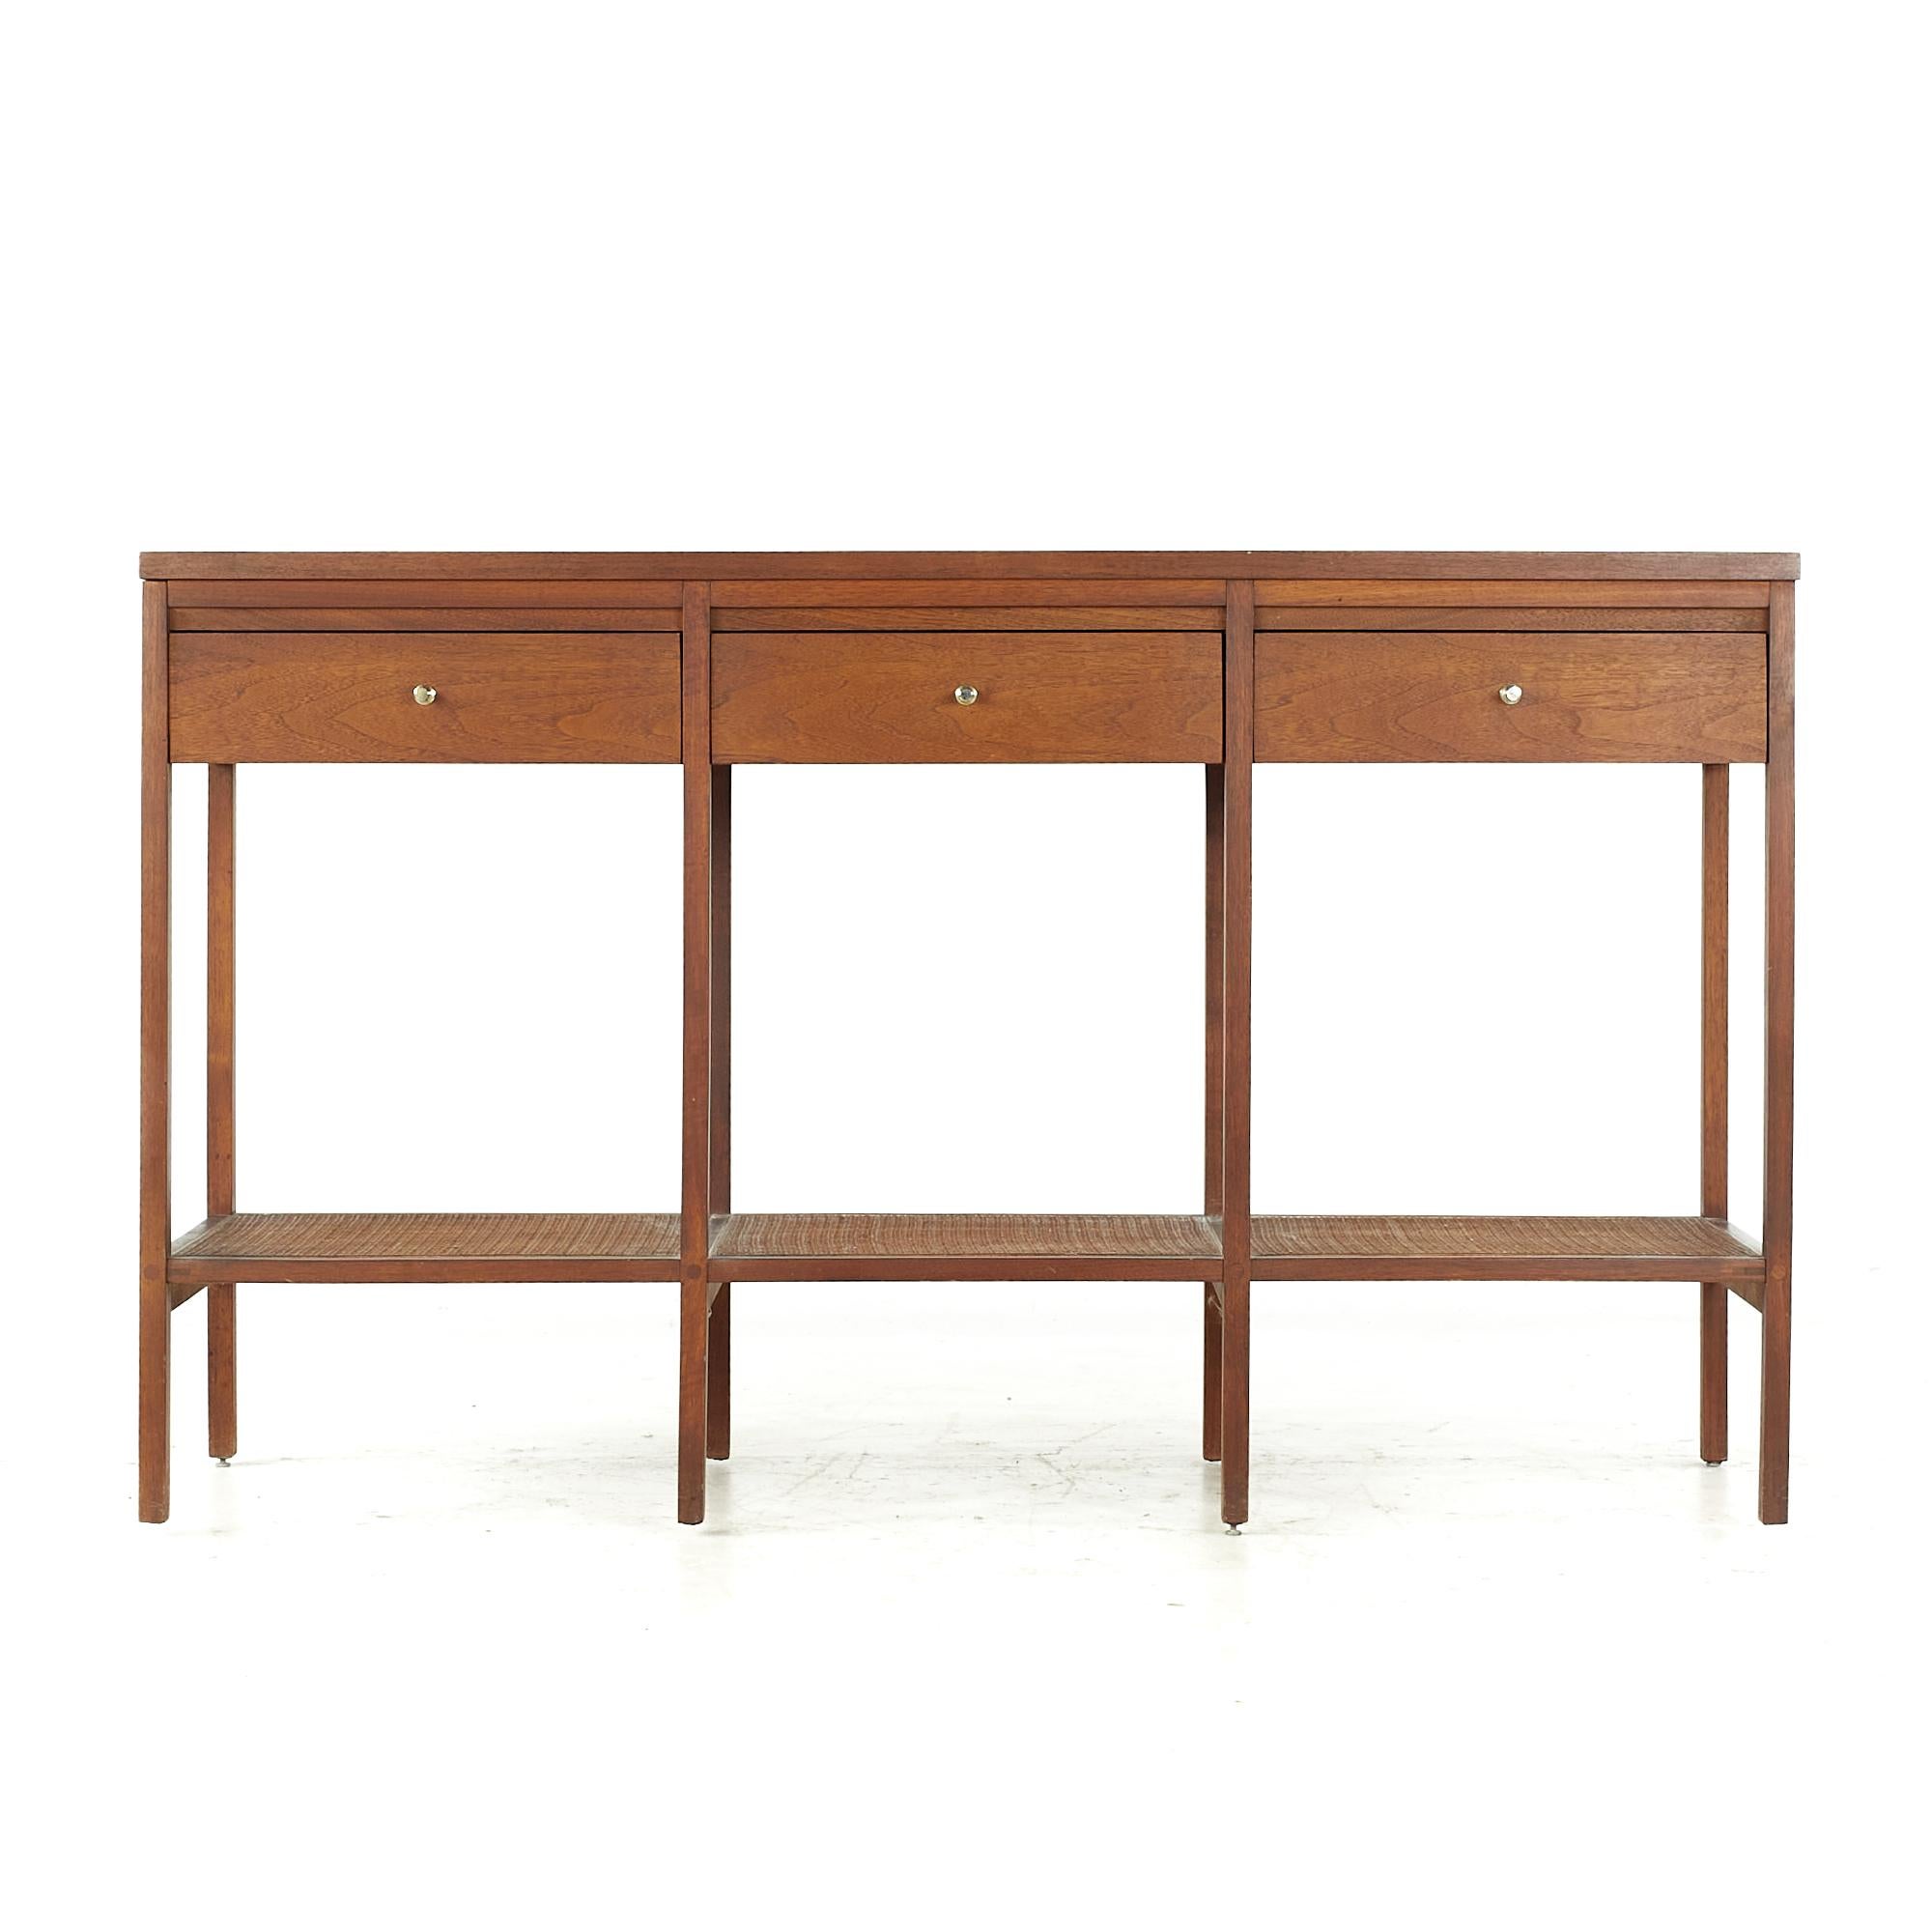 Paul McCobb for Lane Delineator midcentury Rosewood and Cane Console Table

This console table measures: 54.25 wide x 18 deep x 32.25 inches high

All pieces of furniture can be had in what we call restored vintage condition. That means the